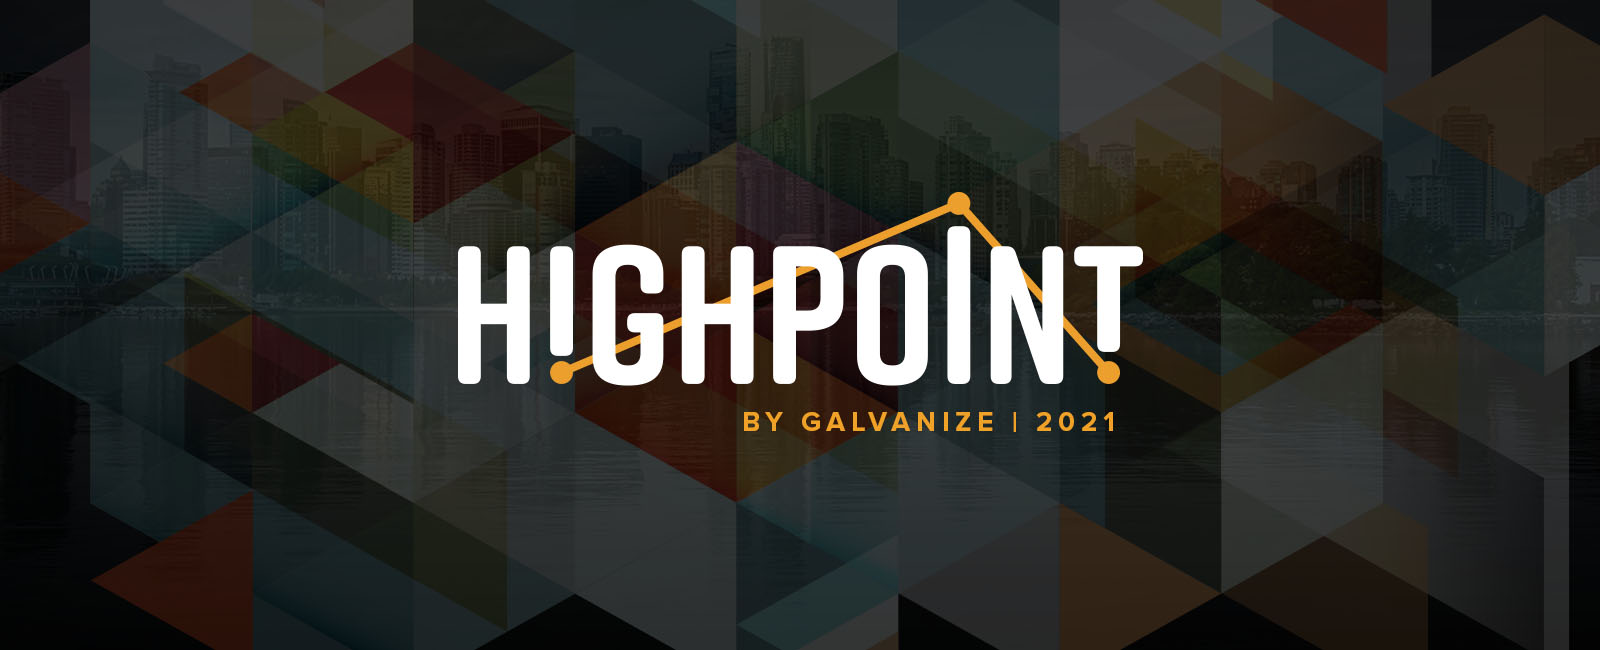 Highlights from Galvanize HighPoint 2021